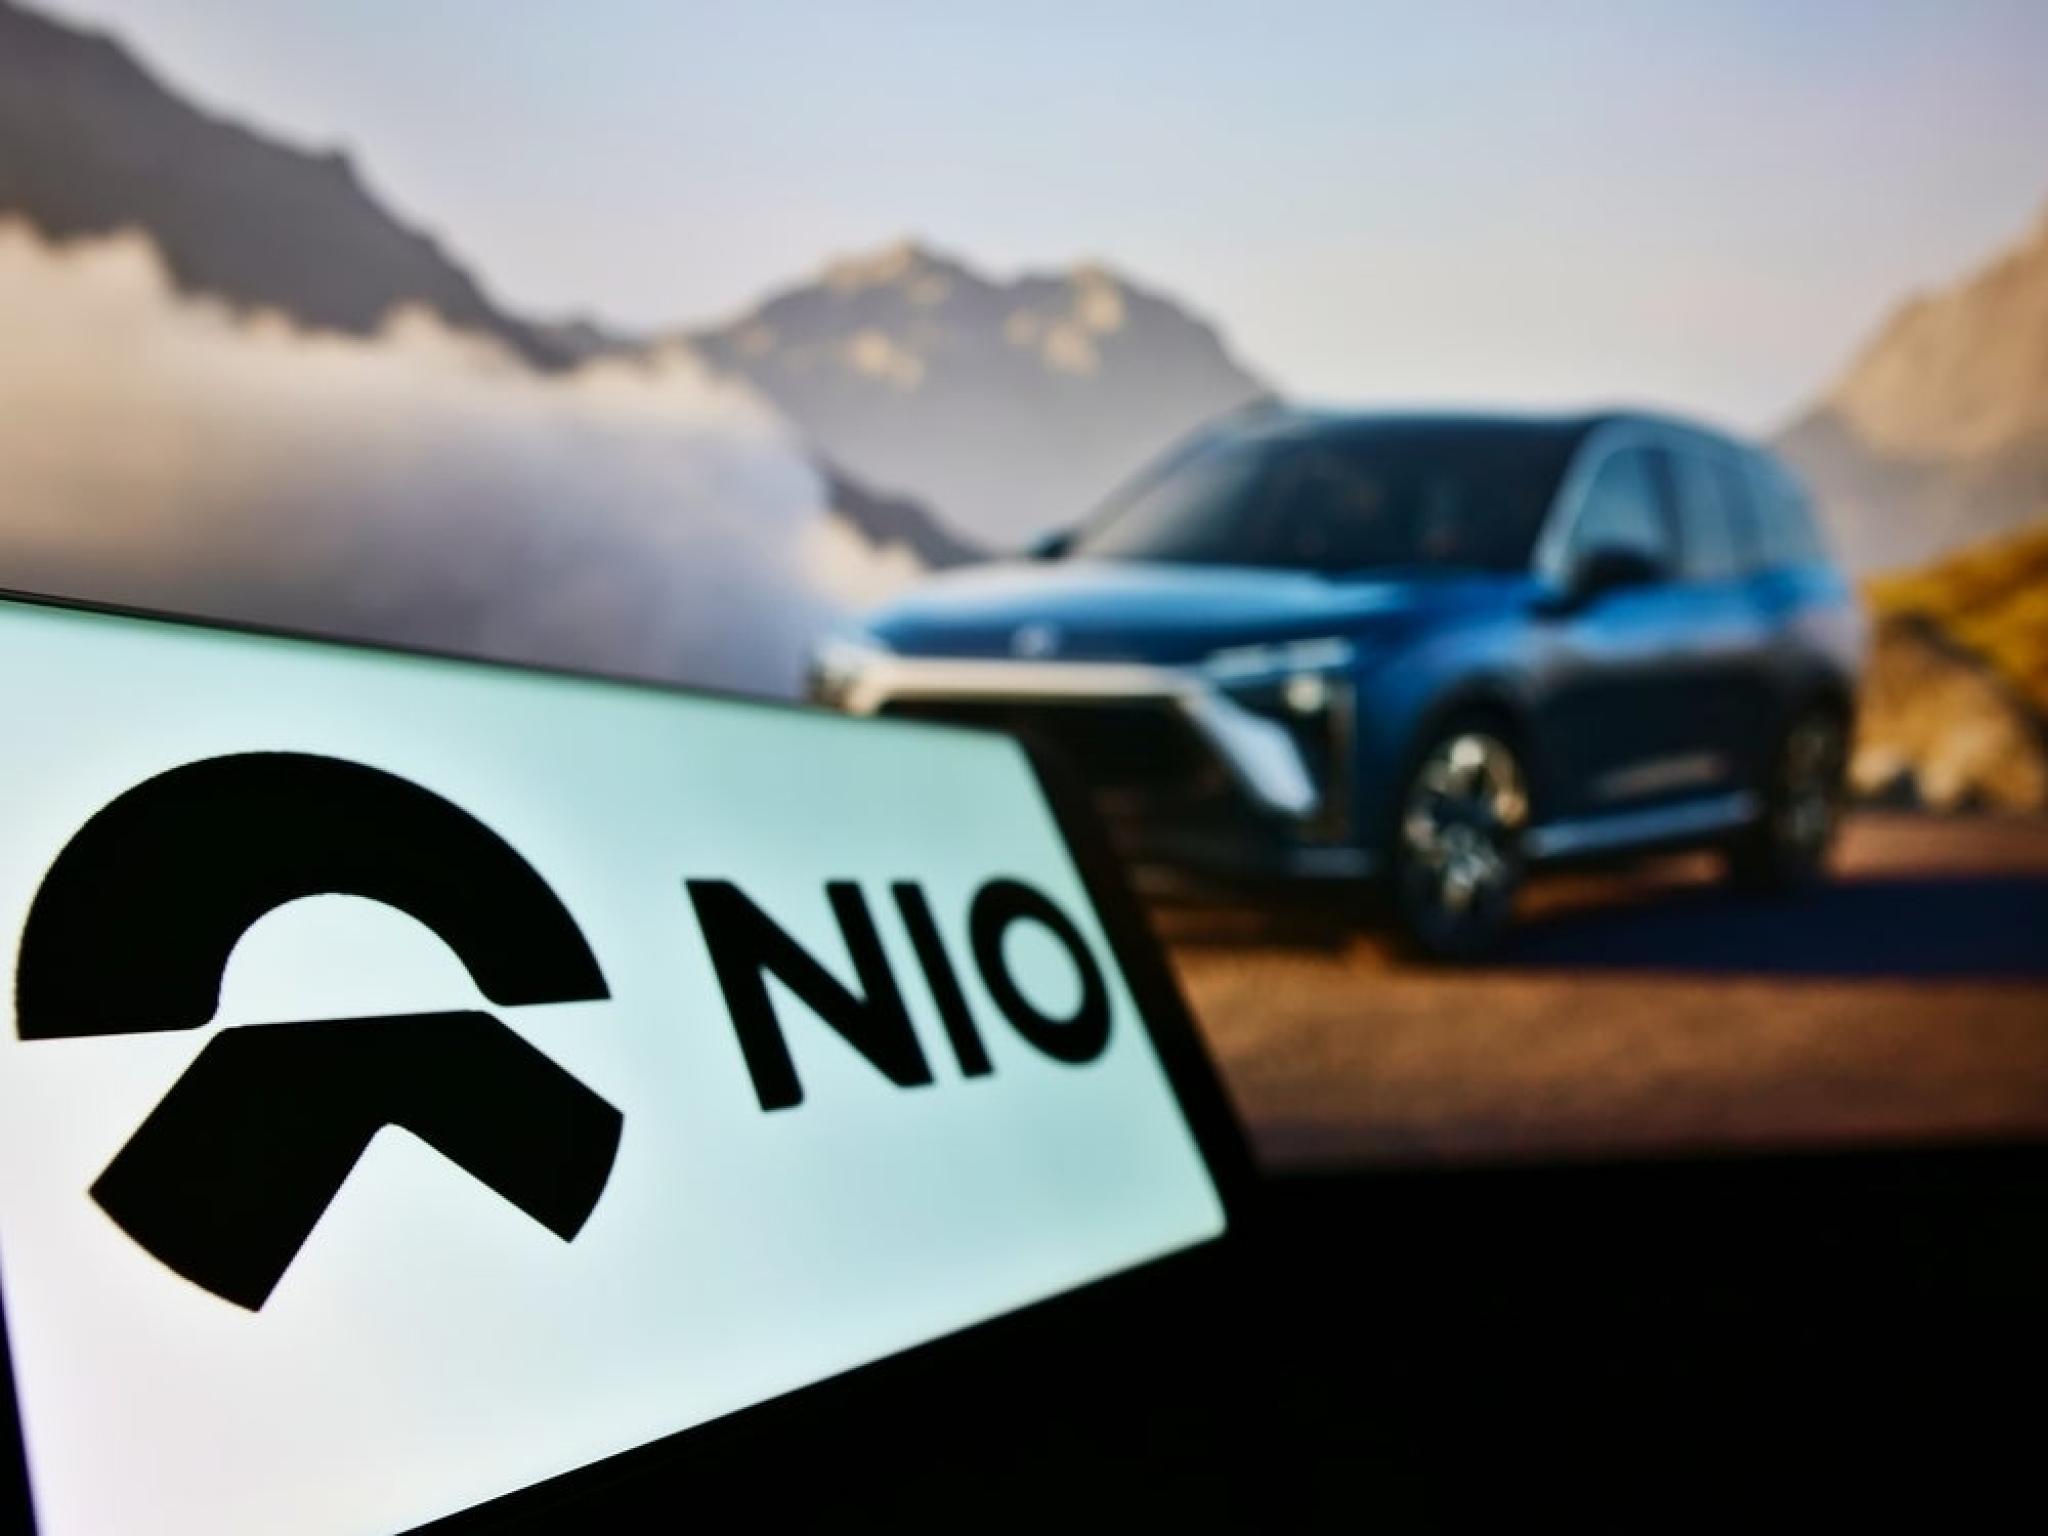  whats-going-on-with-ev-maker-nios-stock 